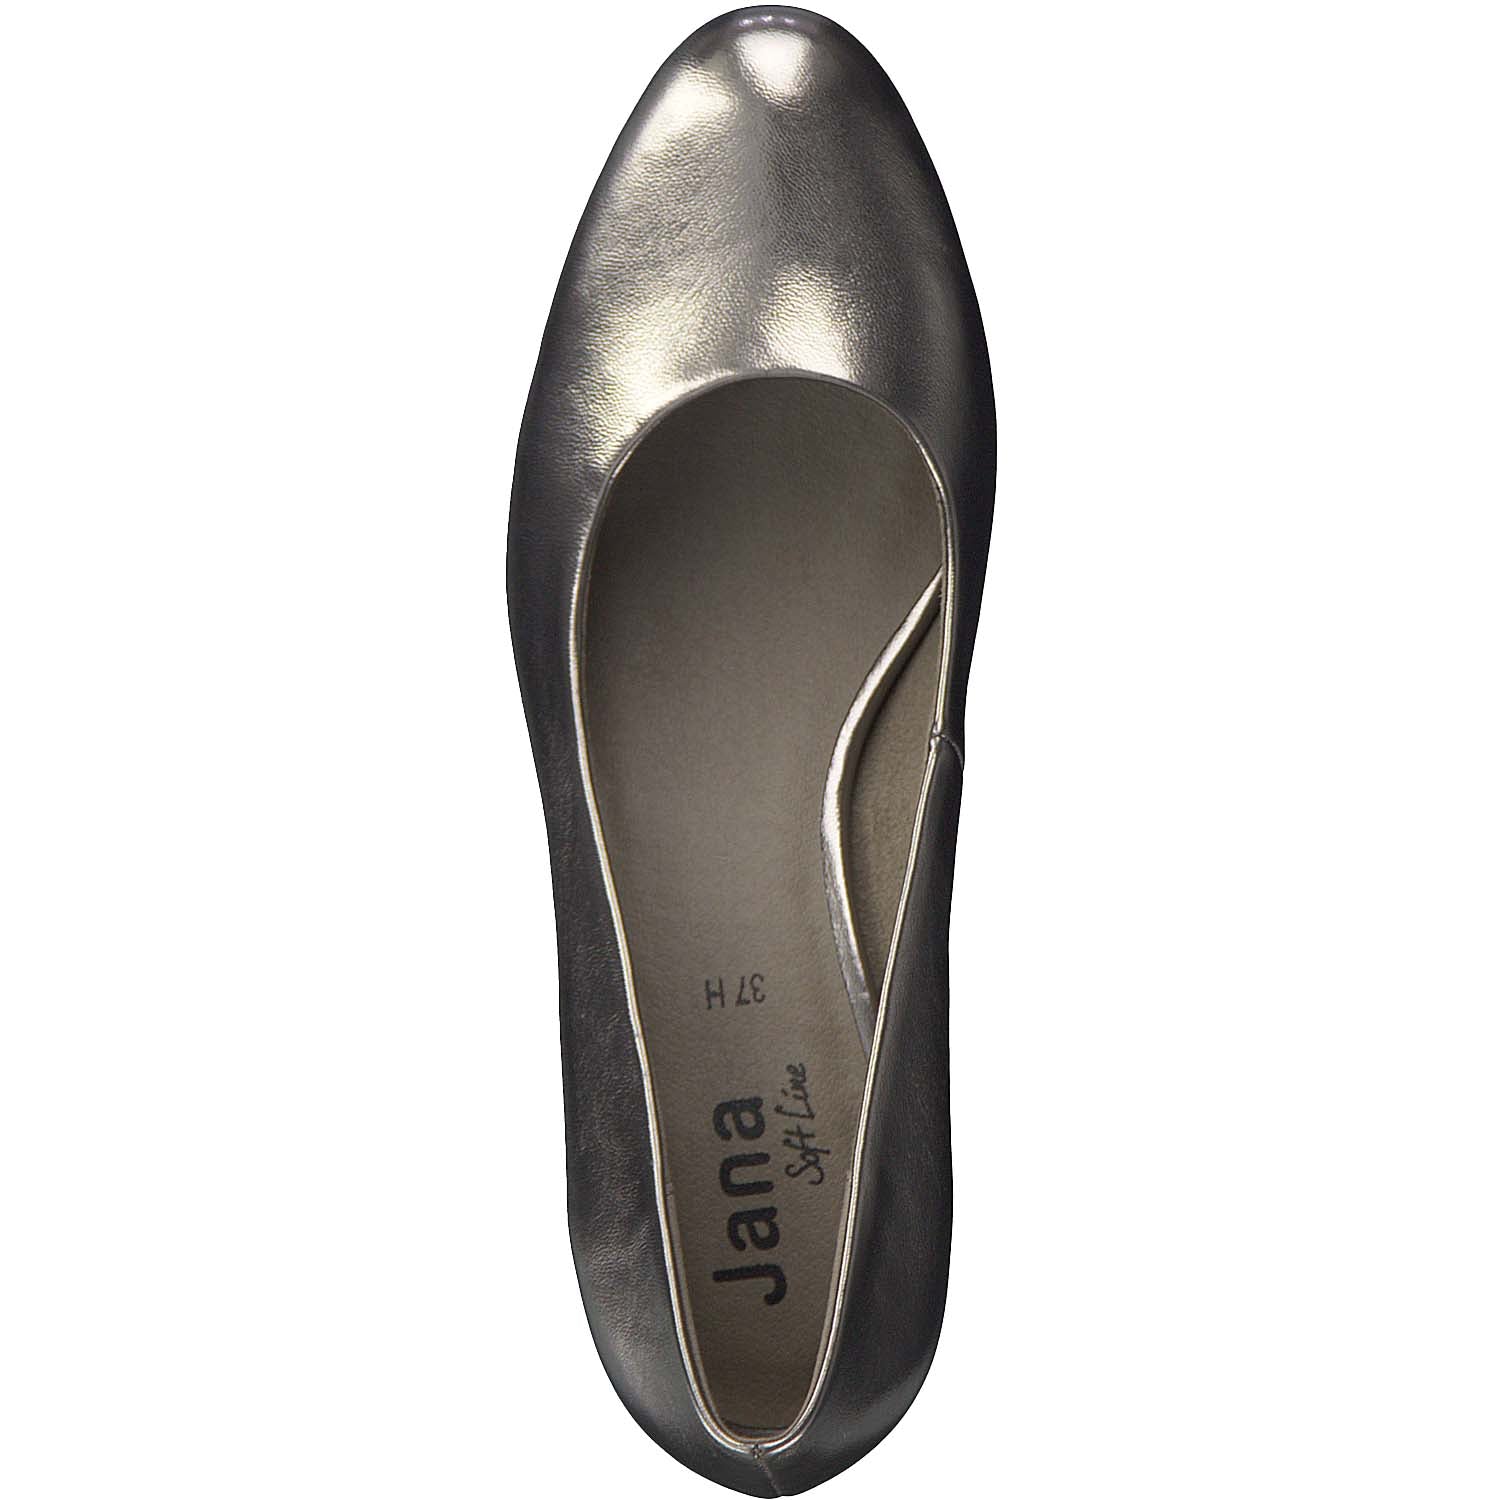 Front view of the elegant Pewter Low Heel.